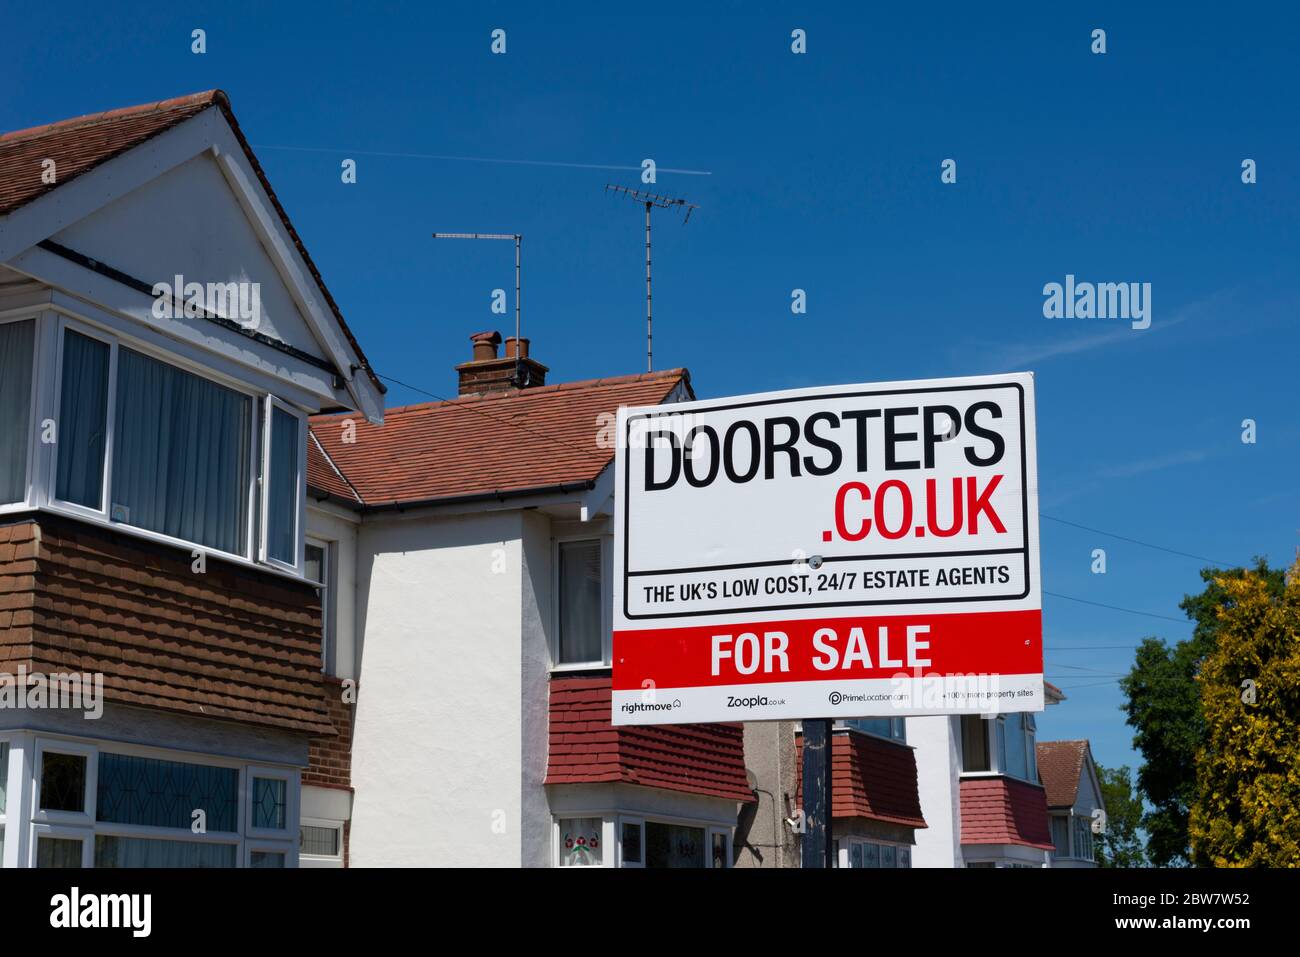 Doorsteps for sale sign. Property market online estate agent. Selling advertising board outside home, house, in terrace. Cheap agency. Web address Stock Photo